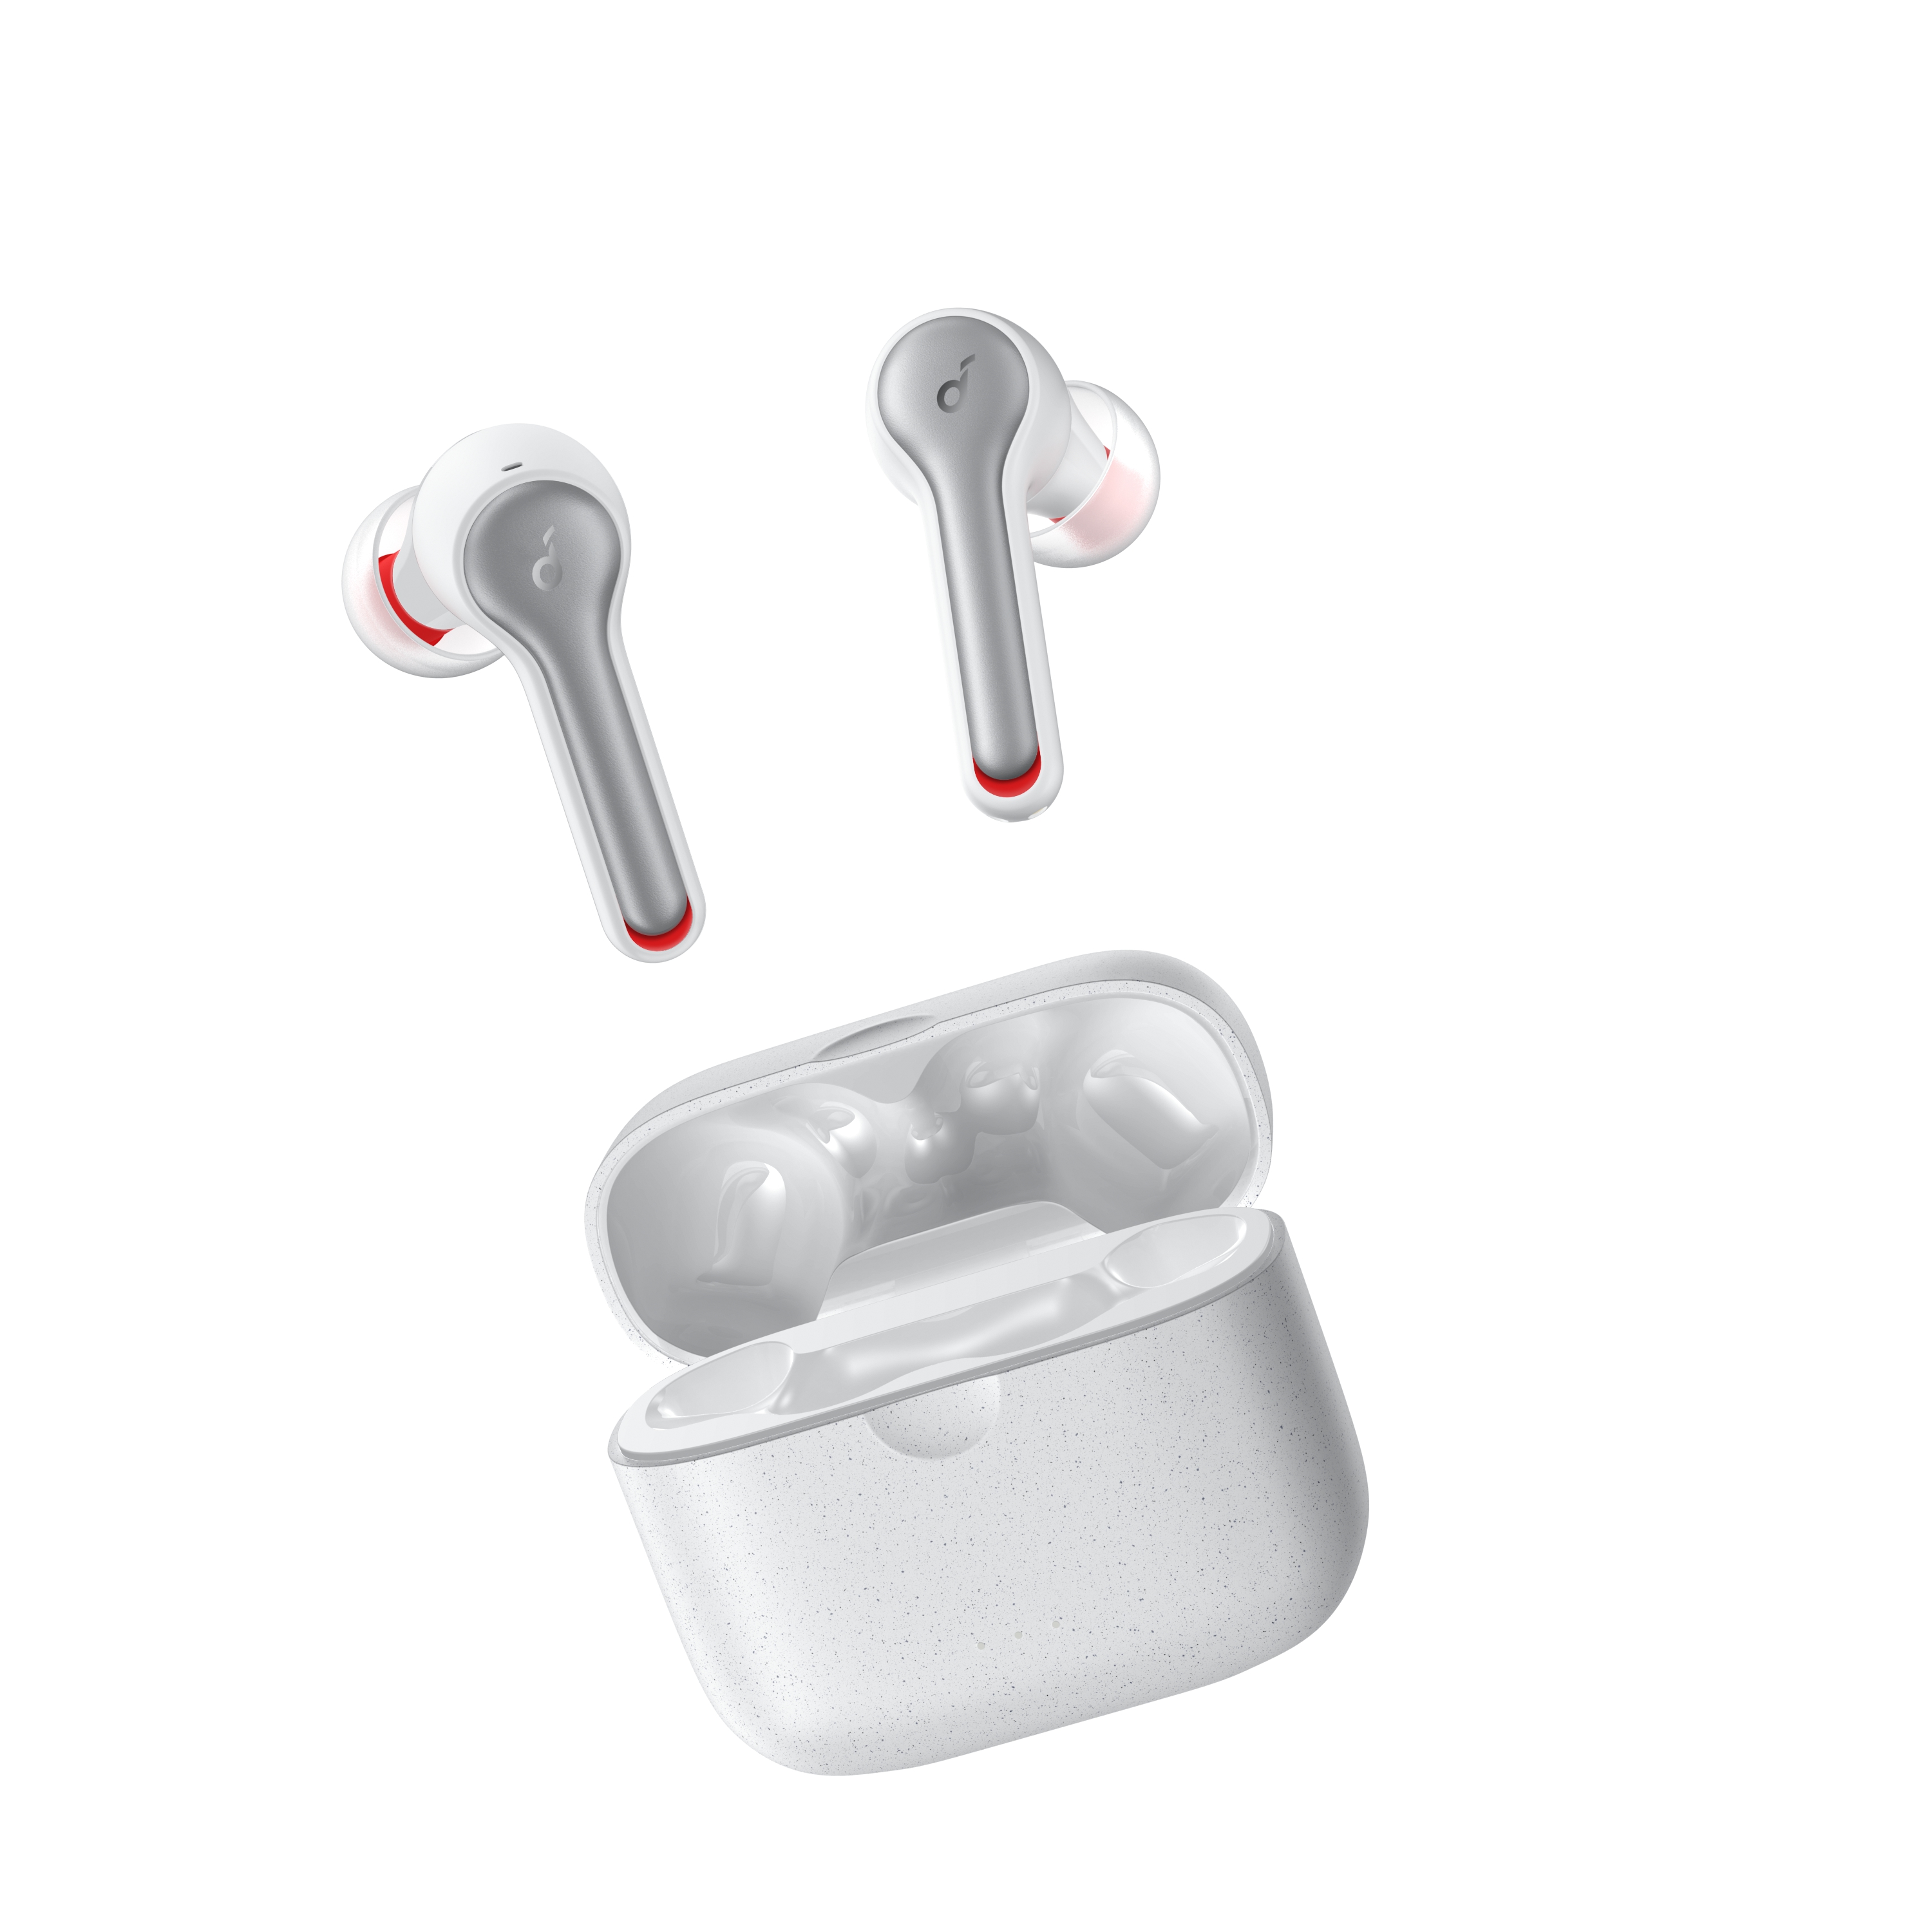 Anker SoundCore Liberty Air 2 TWS In-Ear Headphones, White - image 5 of 5